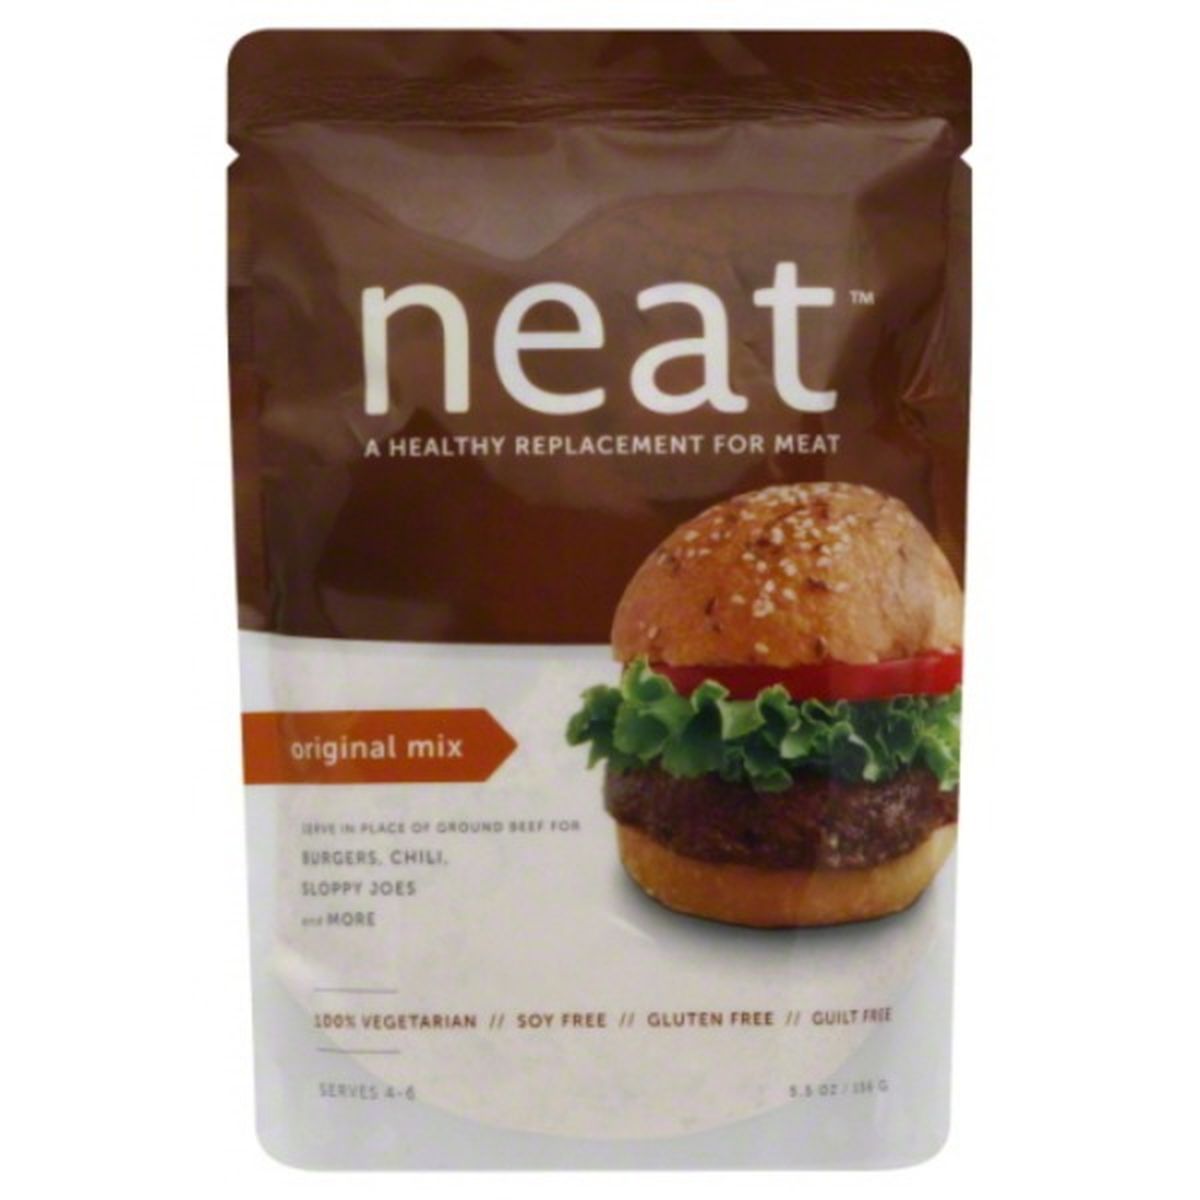 Calories in neat Replacement for Meat, Healthy, Original Mix